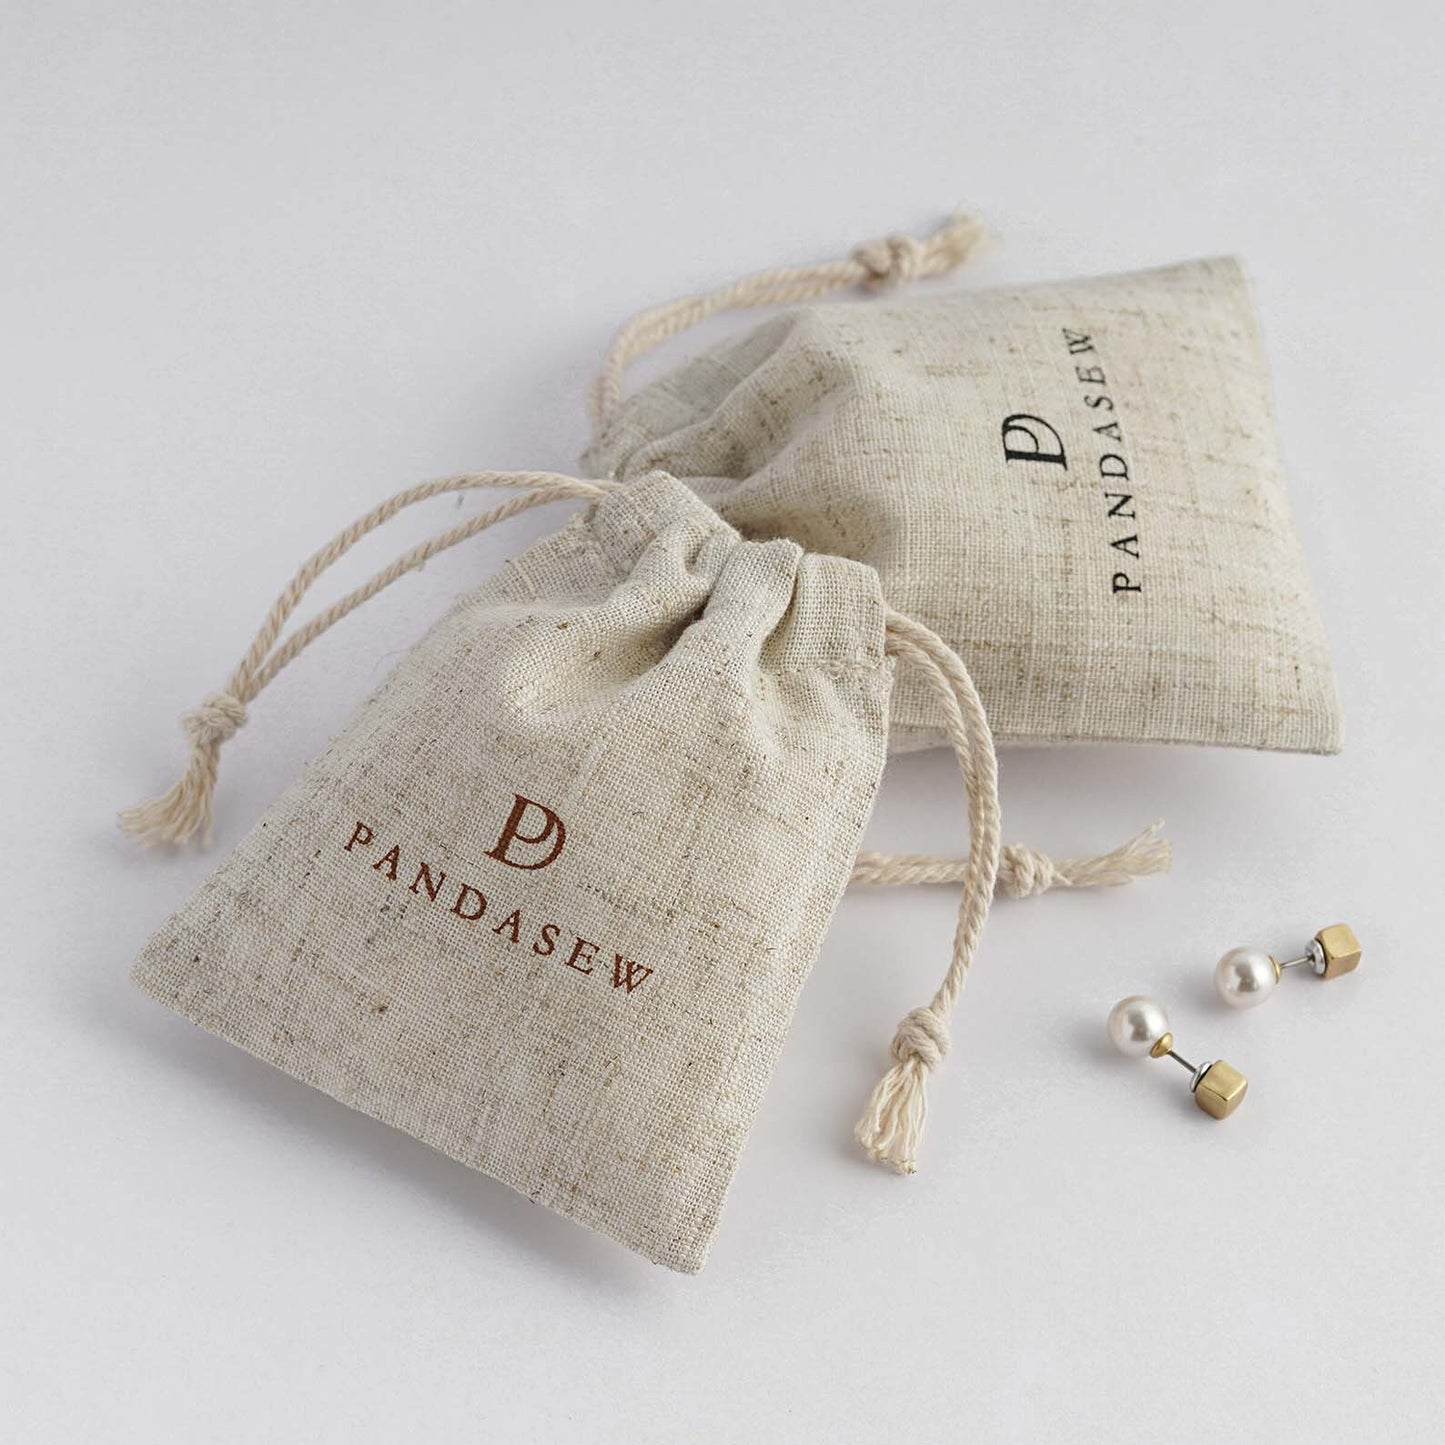 Jewelry Gift Bag Canvas Drawstring Bag Jewelry Packaging Bag